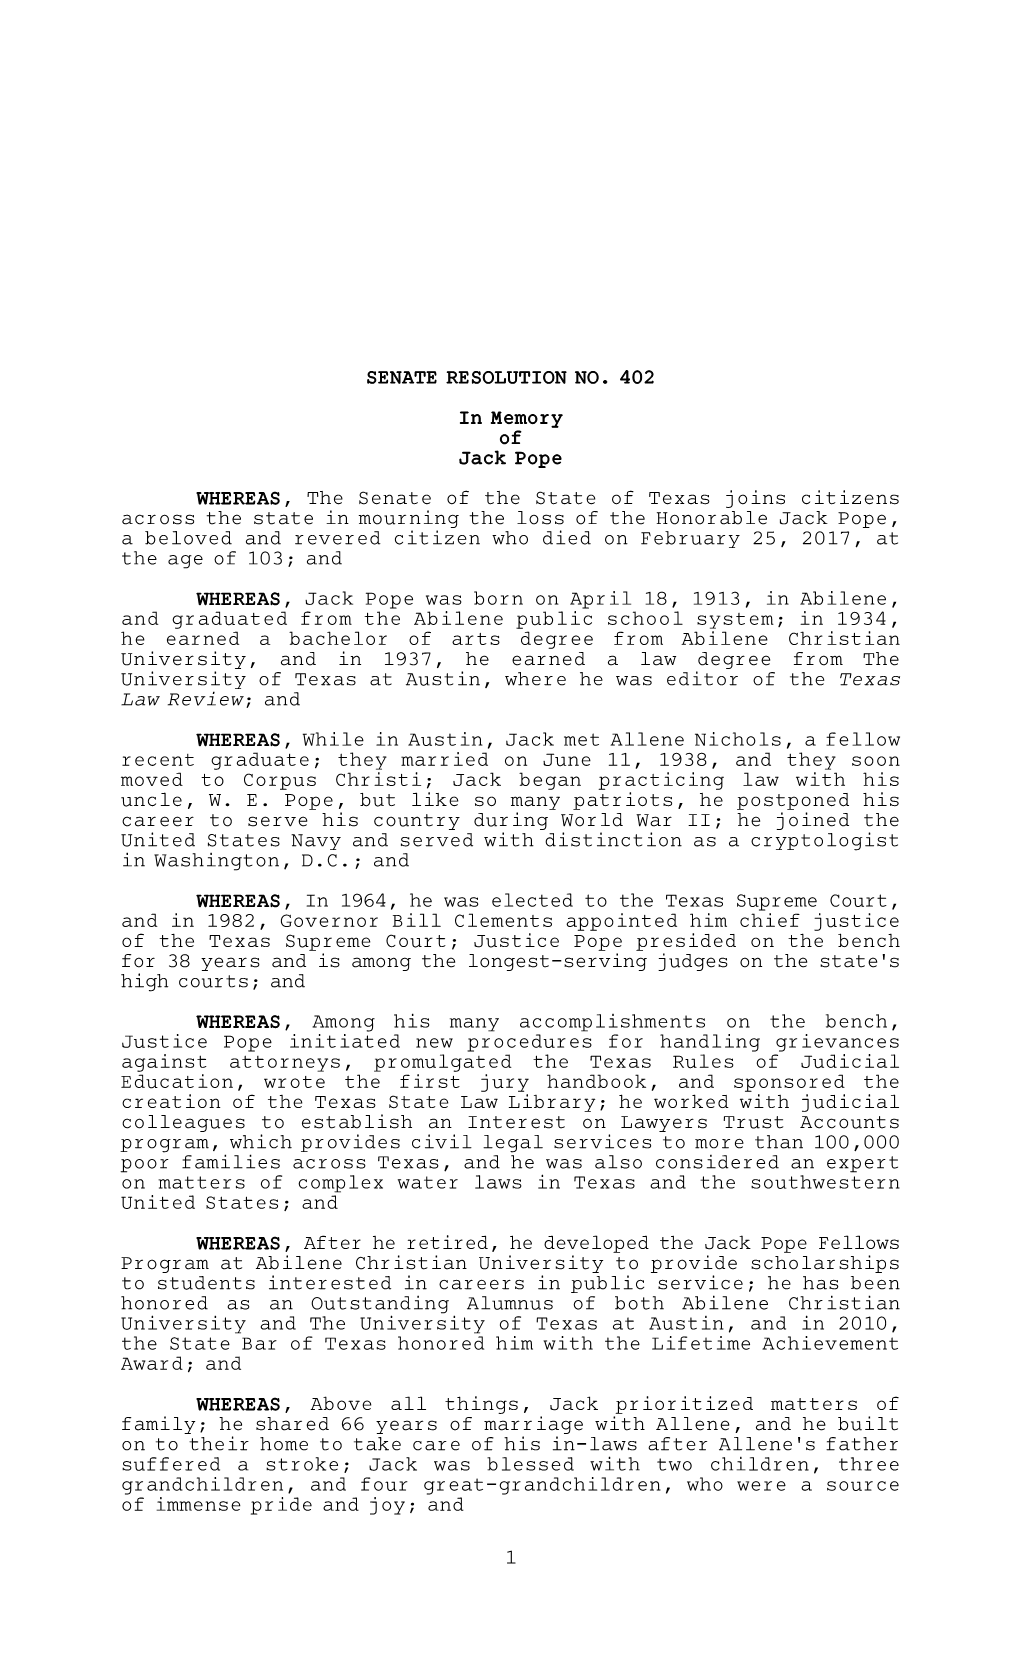 SENATE RESOLUTION NO. 402 in Memory of Jack Pope WHEREAS, the Senate of the State of Texas Joins Citizens